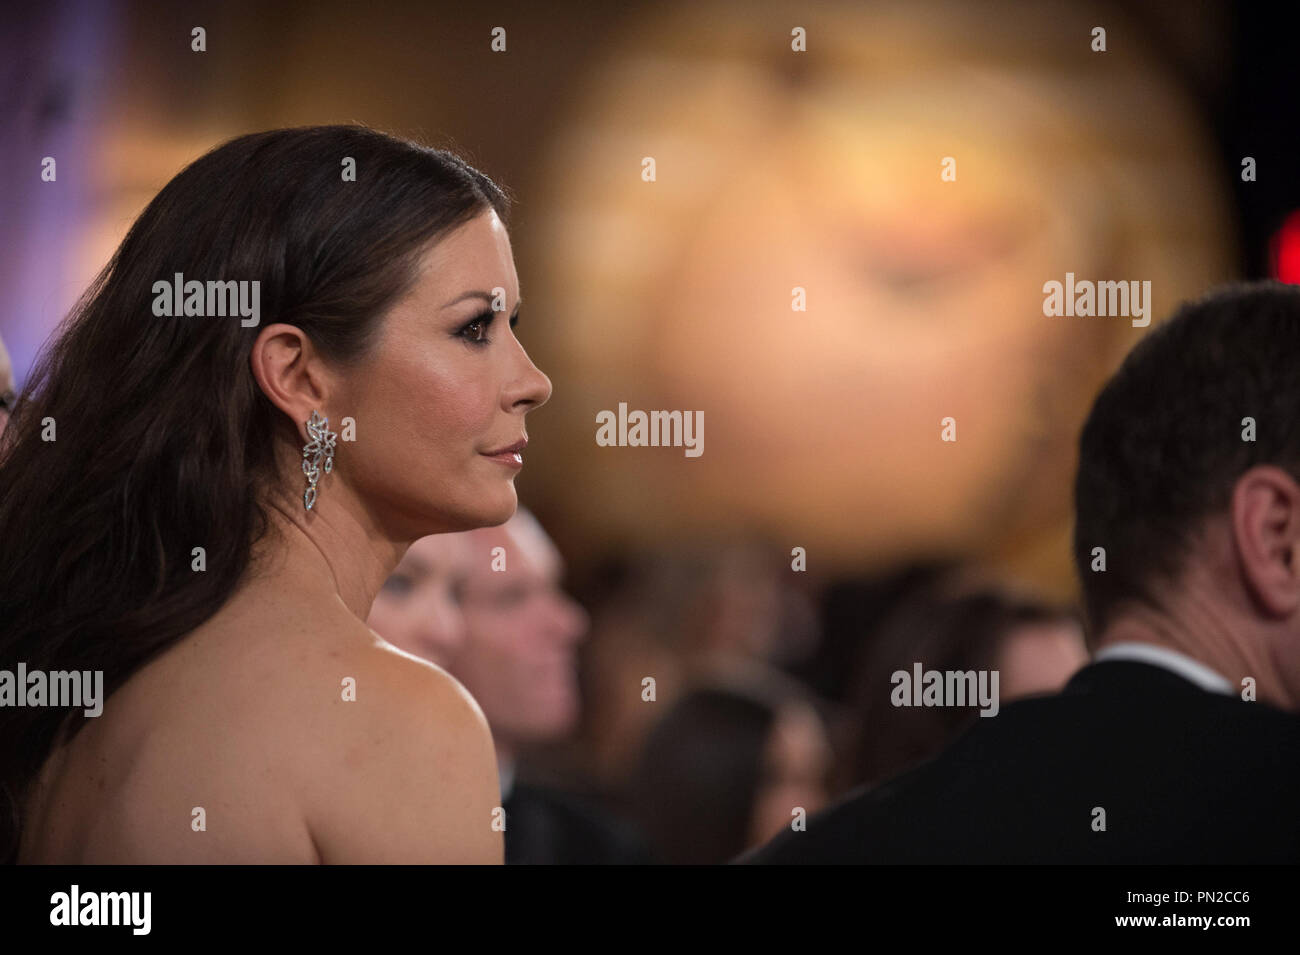 Actress Catherine Zeta-Jones at the 72nd Annual Golden Globe Awards at the Beverly Hilton in Beverly Hills, CA on Sunday, January 11, 2015.  File Reference # 32536 537JRC  For Editorial Use Only -  All Rights Reserved Stock Photo